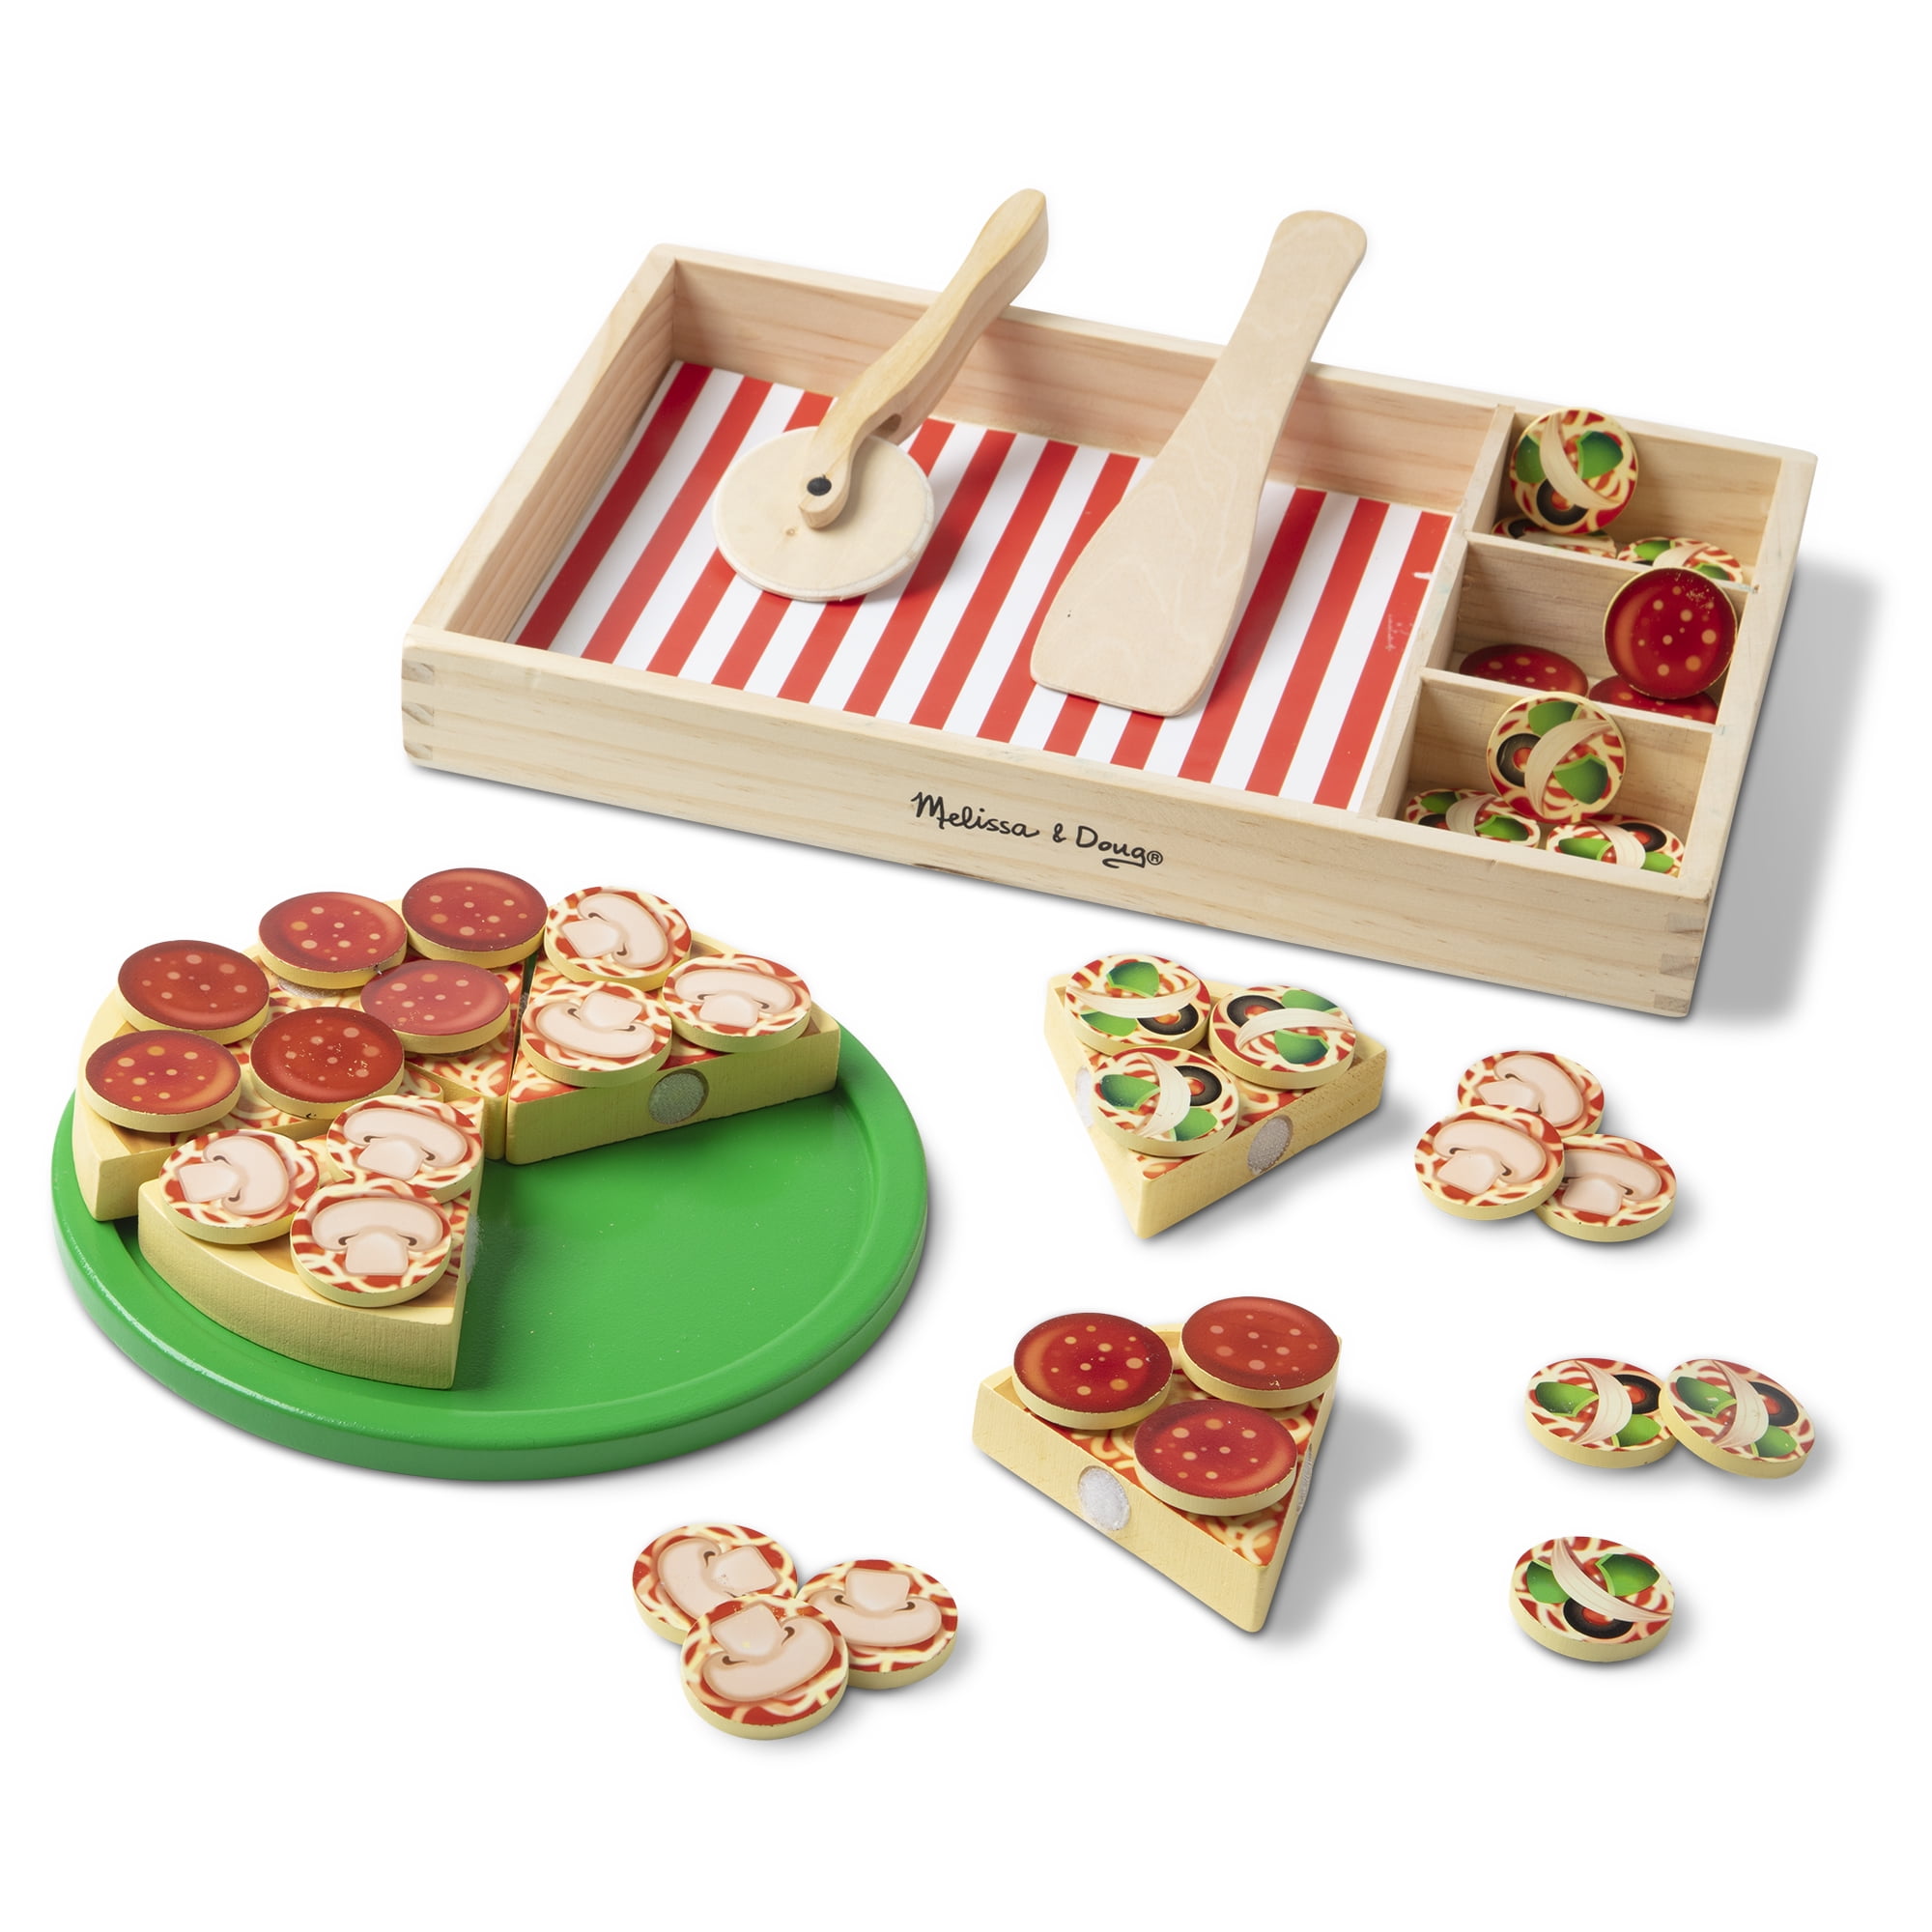 4 Pieces/set Role Play Kitchen Games Motor Skills Early Learning Cake Pattern 